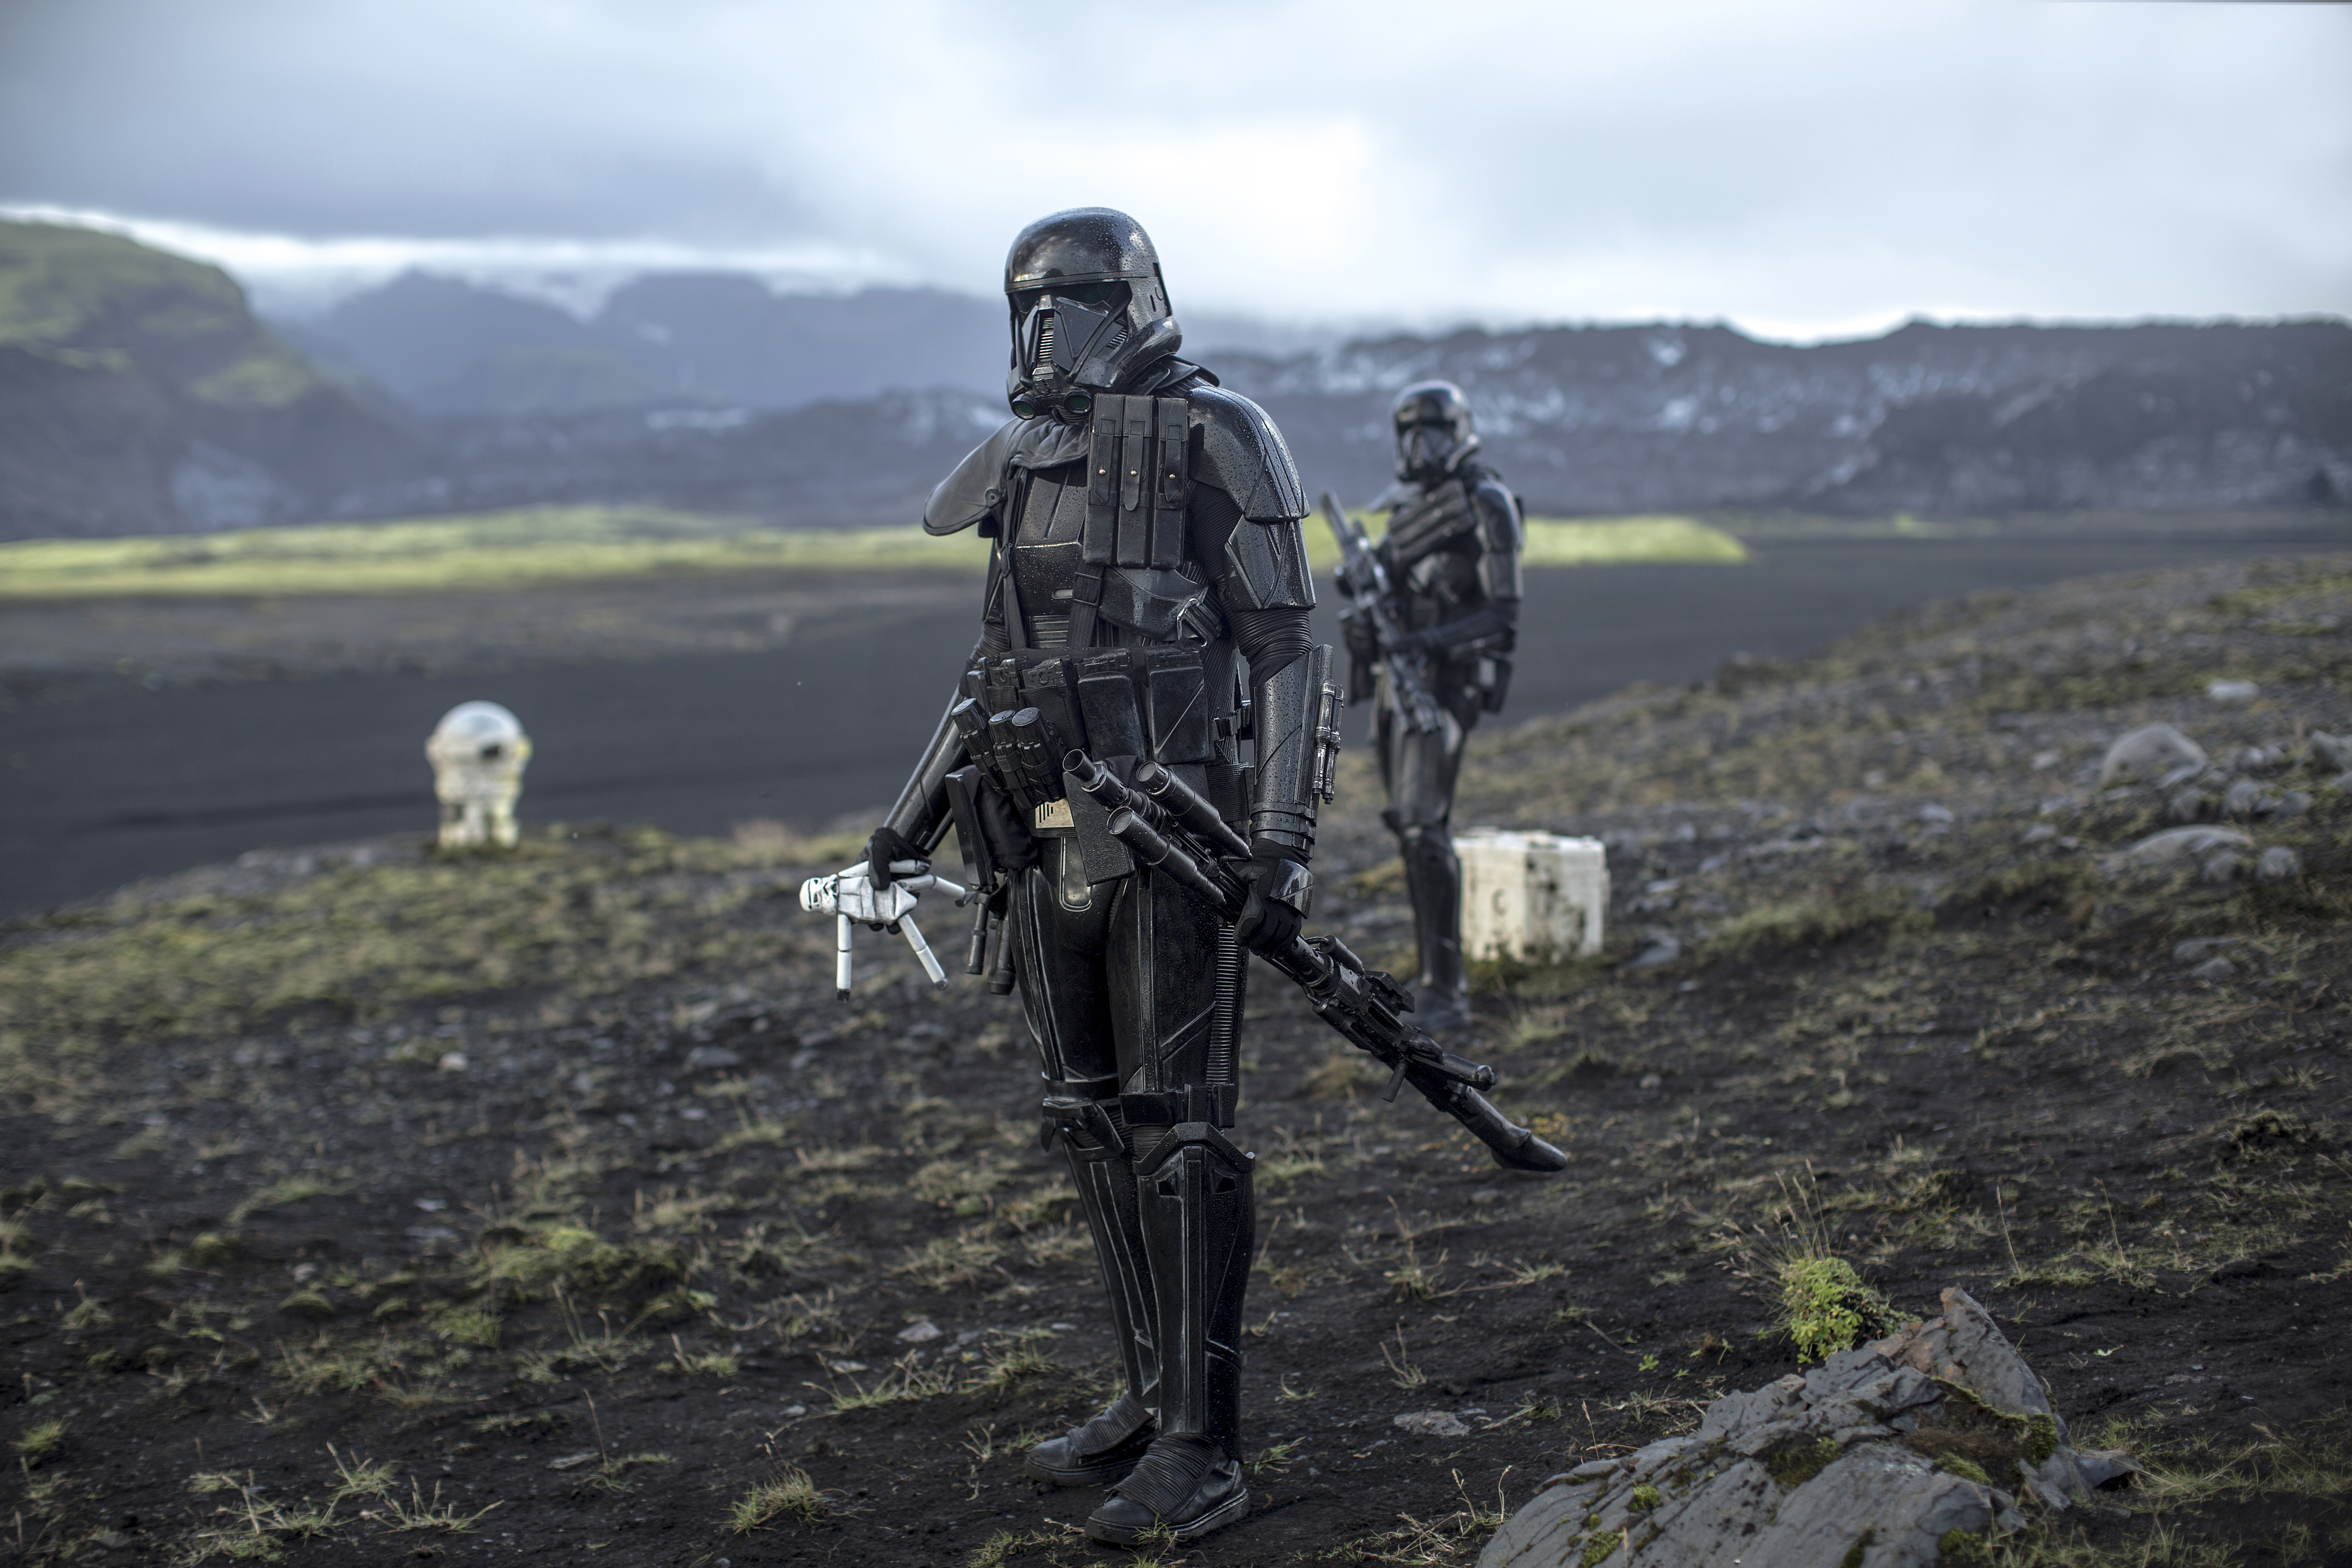 rogue one wallpaper hd,soldier,personal protective equipment,fell,tundra,outerwear